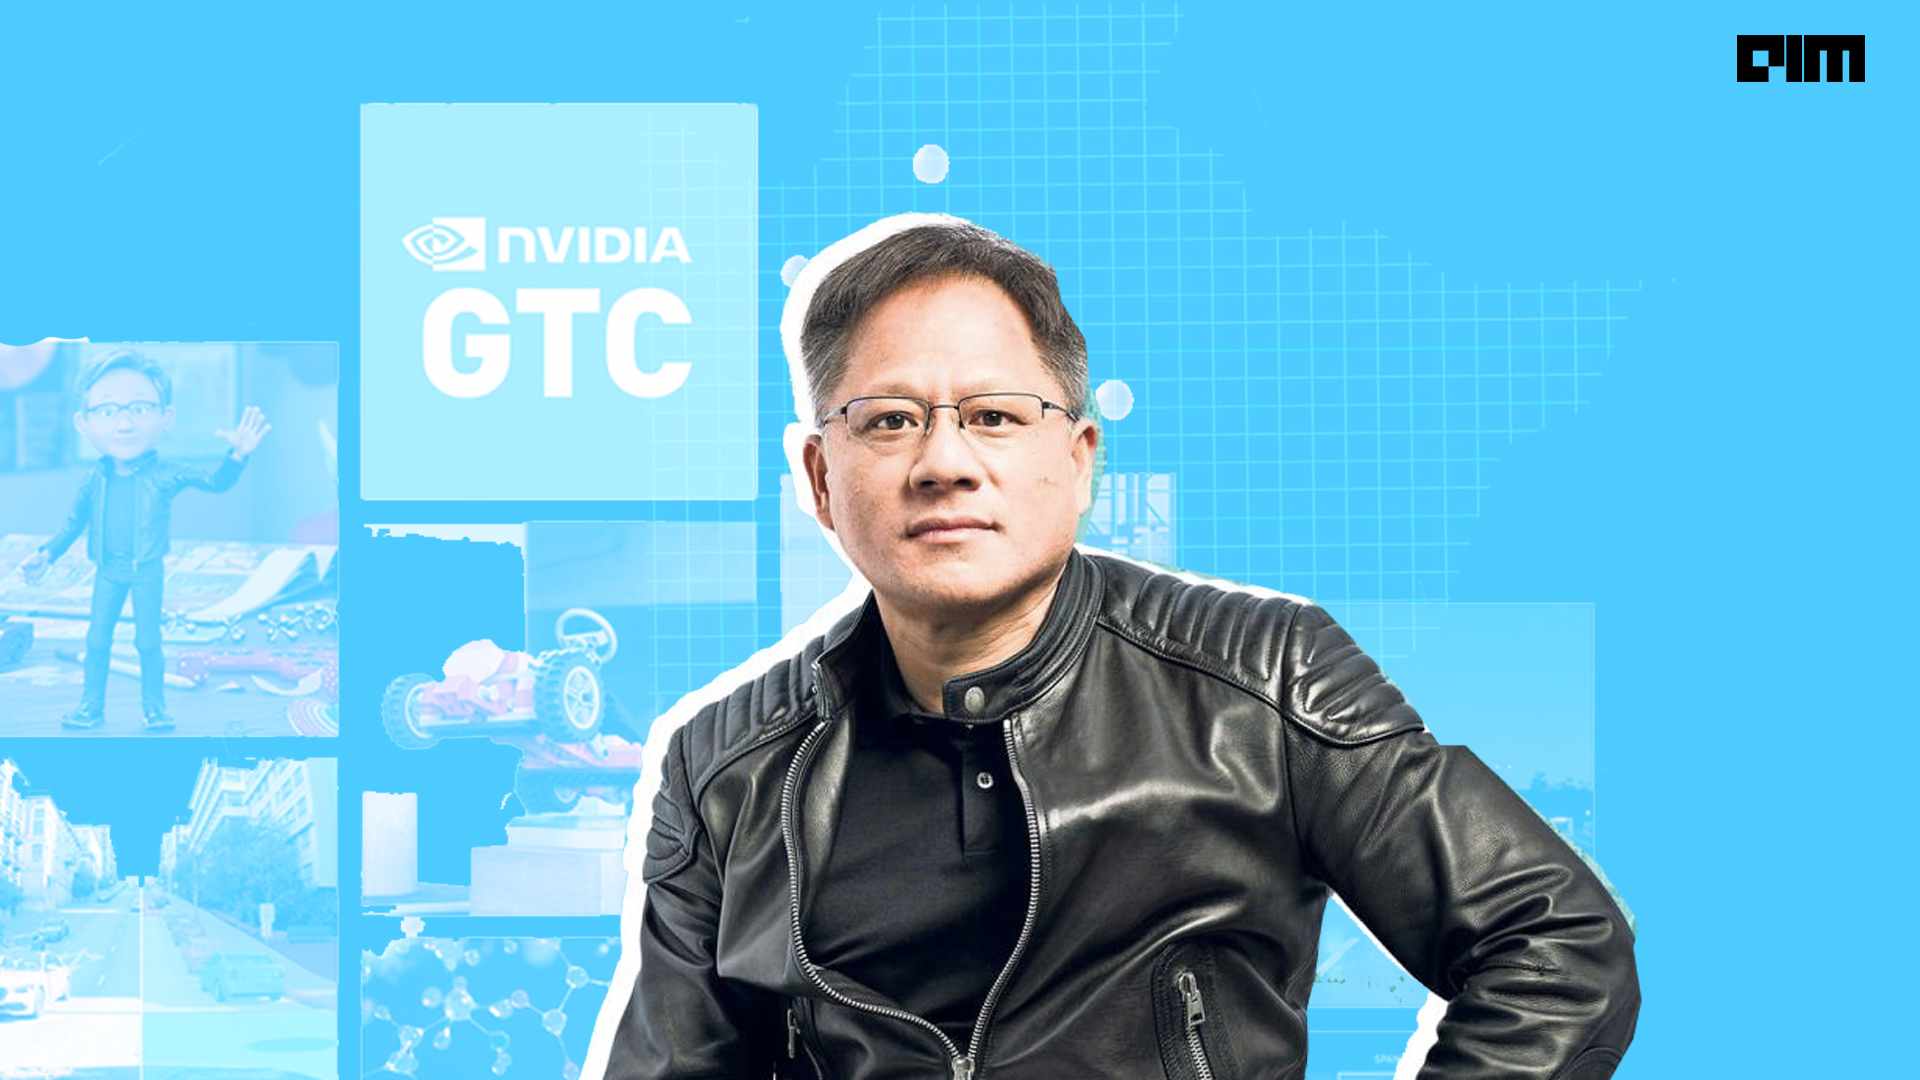 NVIDIA GTC on X: Save the date for the #GTC22 keynote! Hear NVIDIA CEO and  Founder Jensen Huang unveil the latest breakthroughs and see the  innovations that are transforming every industry. Join